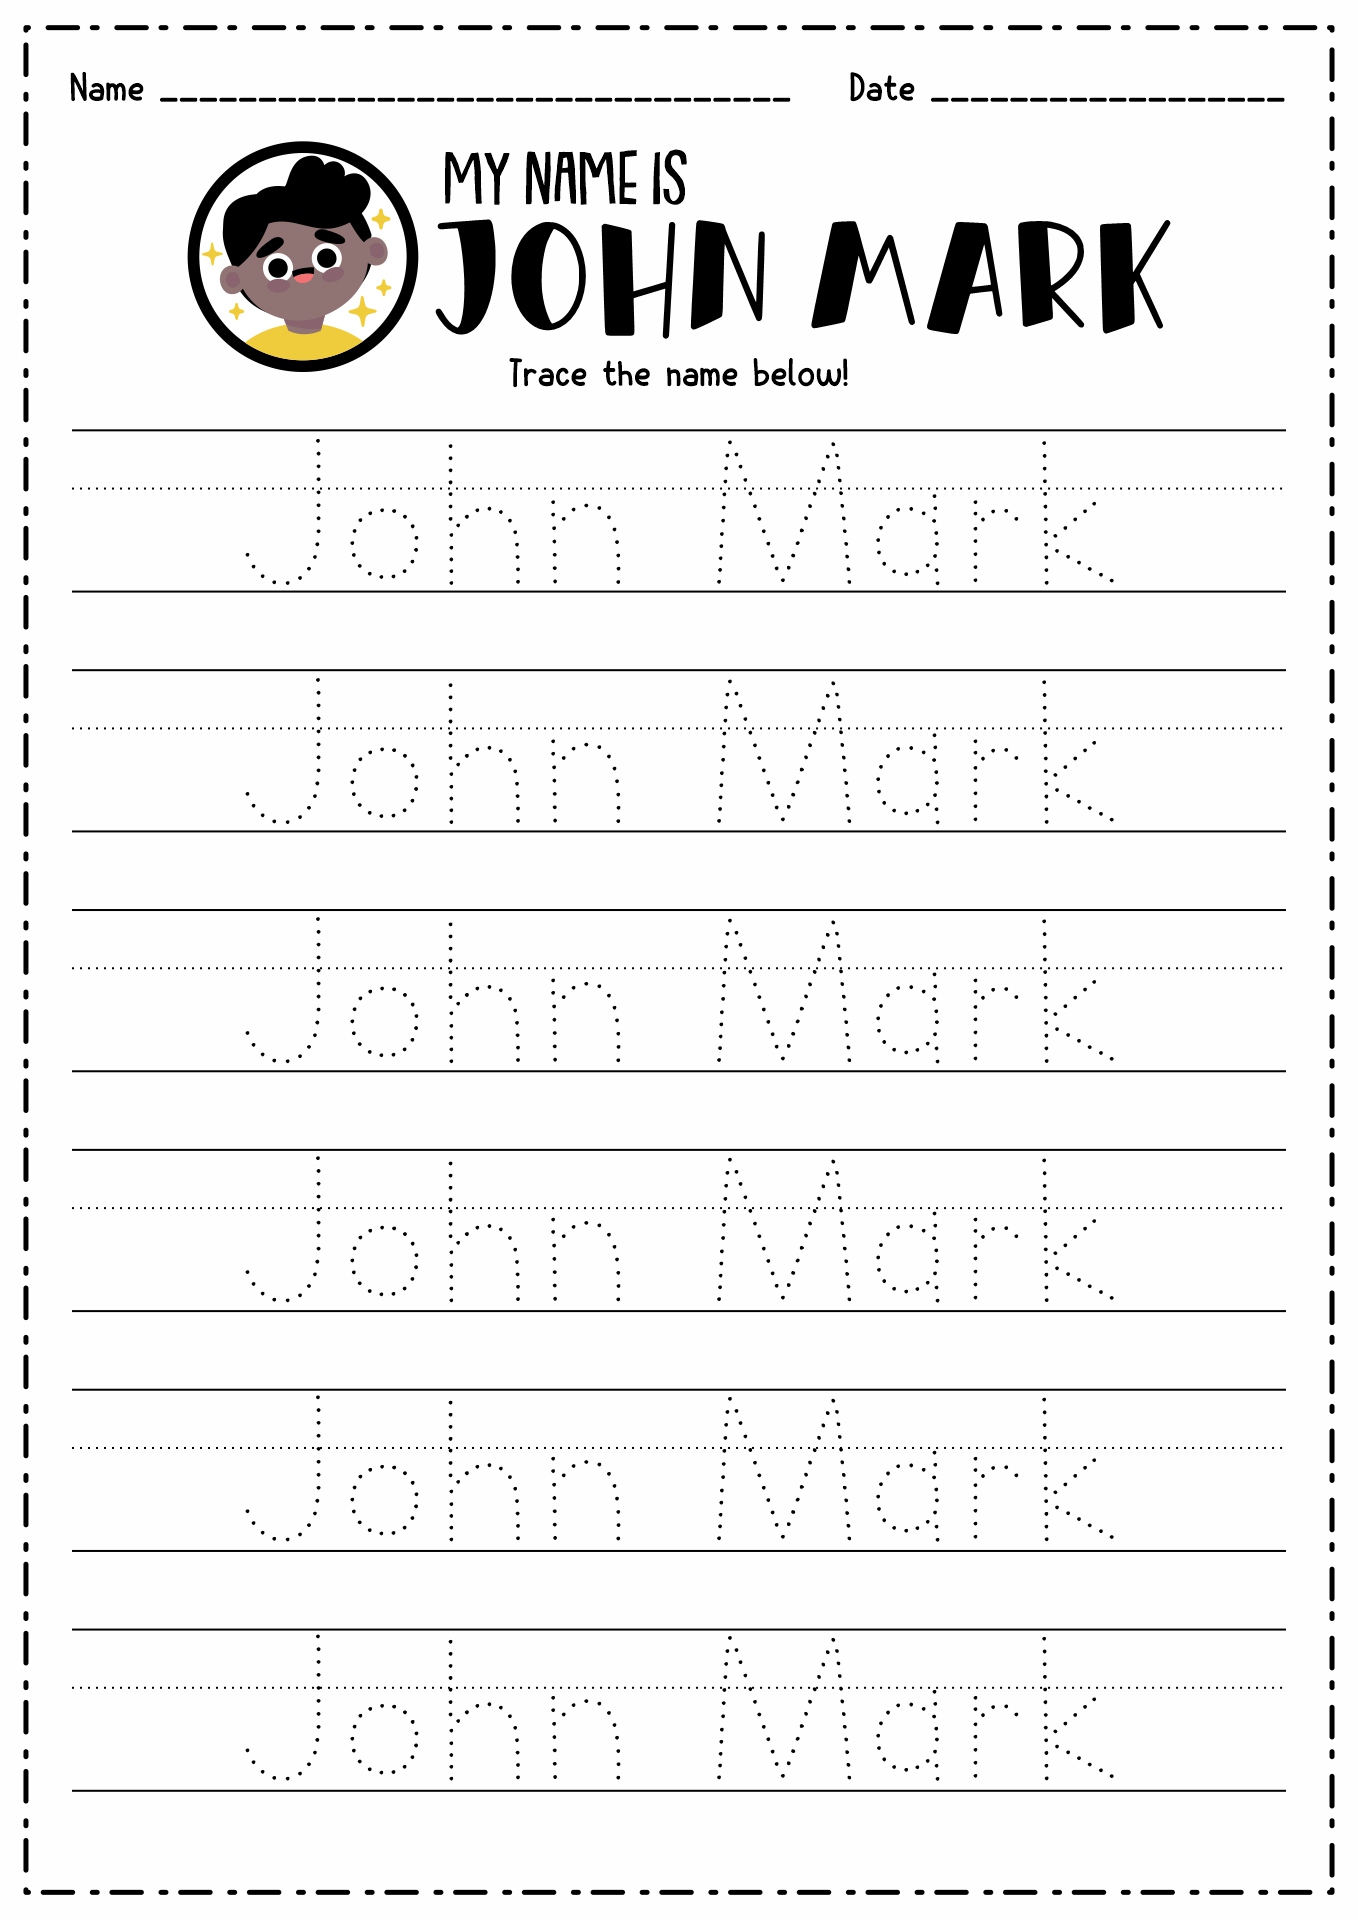 14-best-images-of-create-name-tracing-worksheets-create-your-own